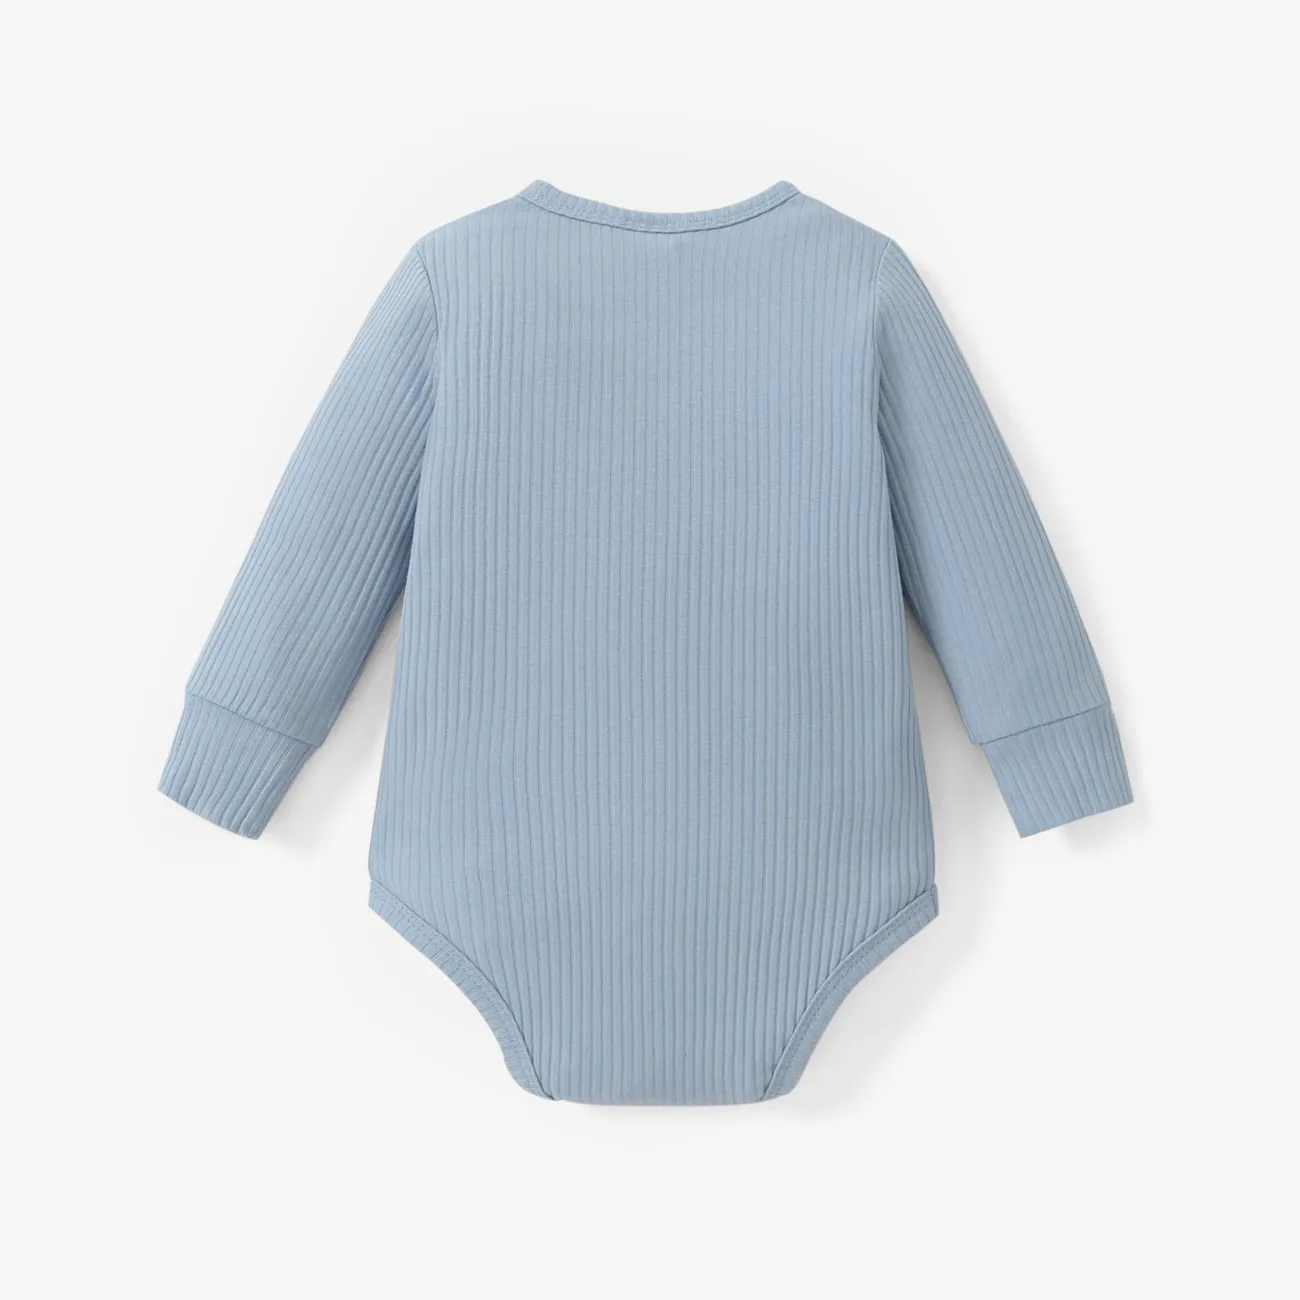 Baby Boy/Girl 95% Cotton Ribbed Long-sleeve Button Up Romper Bluish Grey big image 1